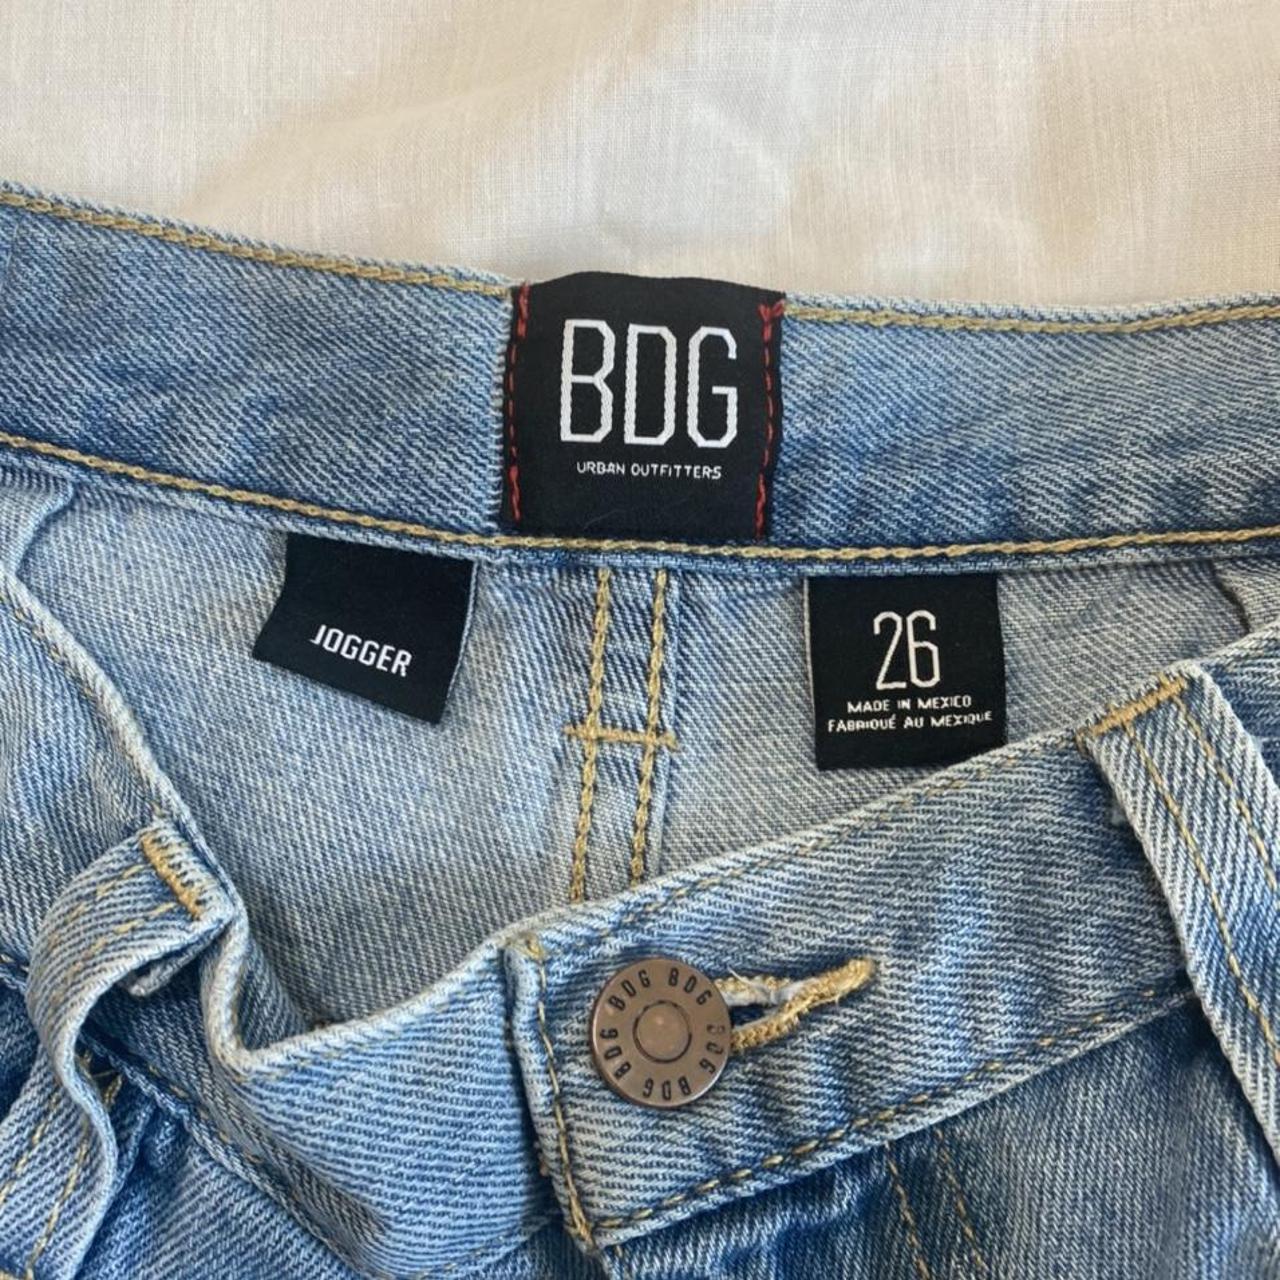 urban outfitters BDG “jogger” wide leg jeans - Depop